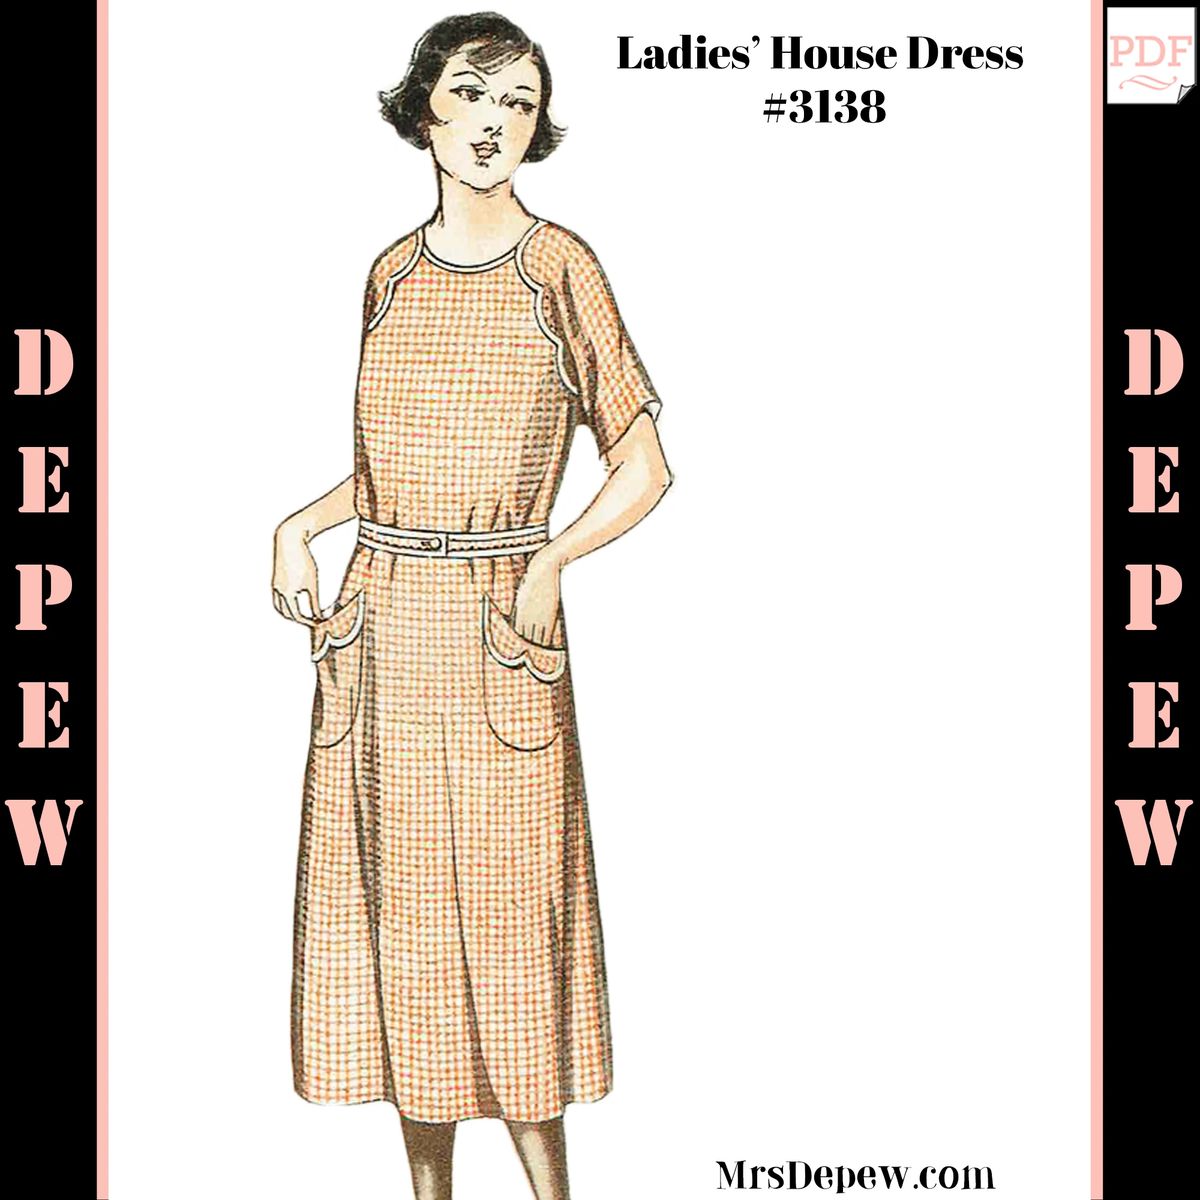 Vintage Sewing Pattern 1910s-1920s Ladies' House Dress Size 38" Bust #3138  - INSTANT DOWNLOAD